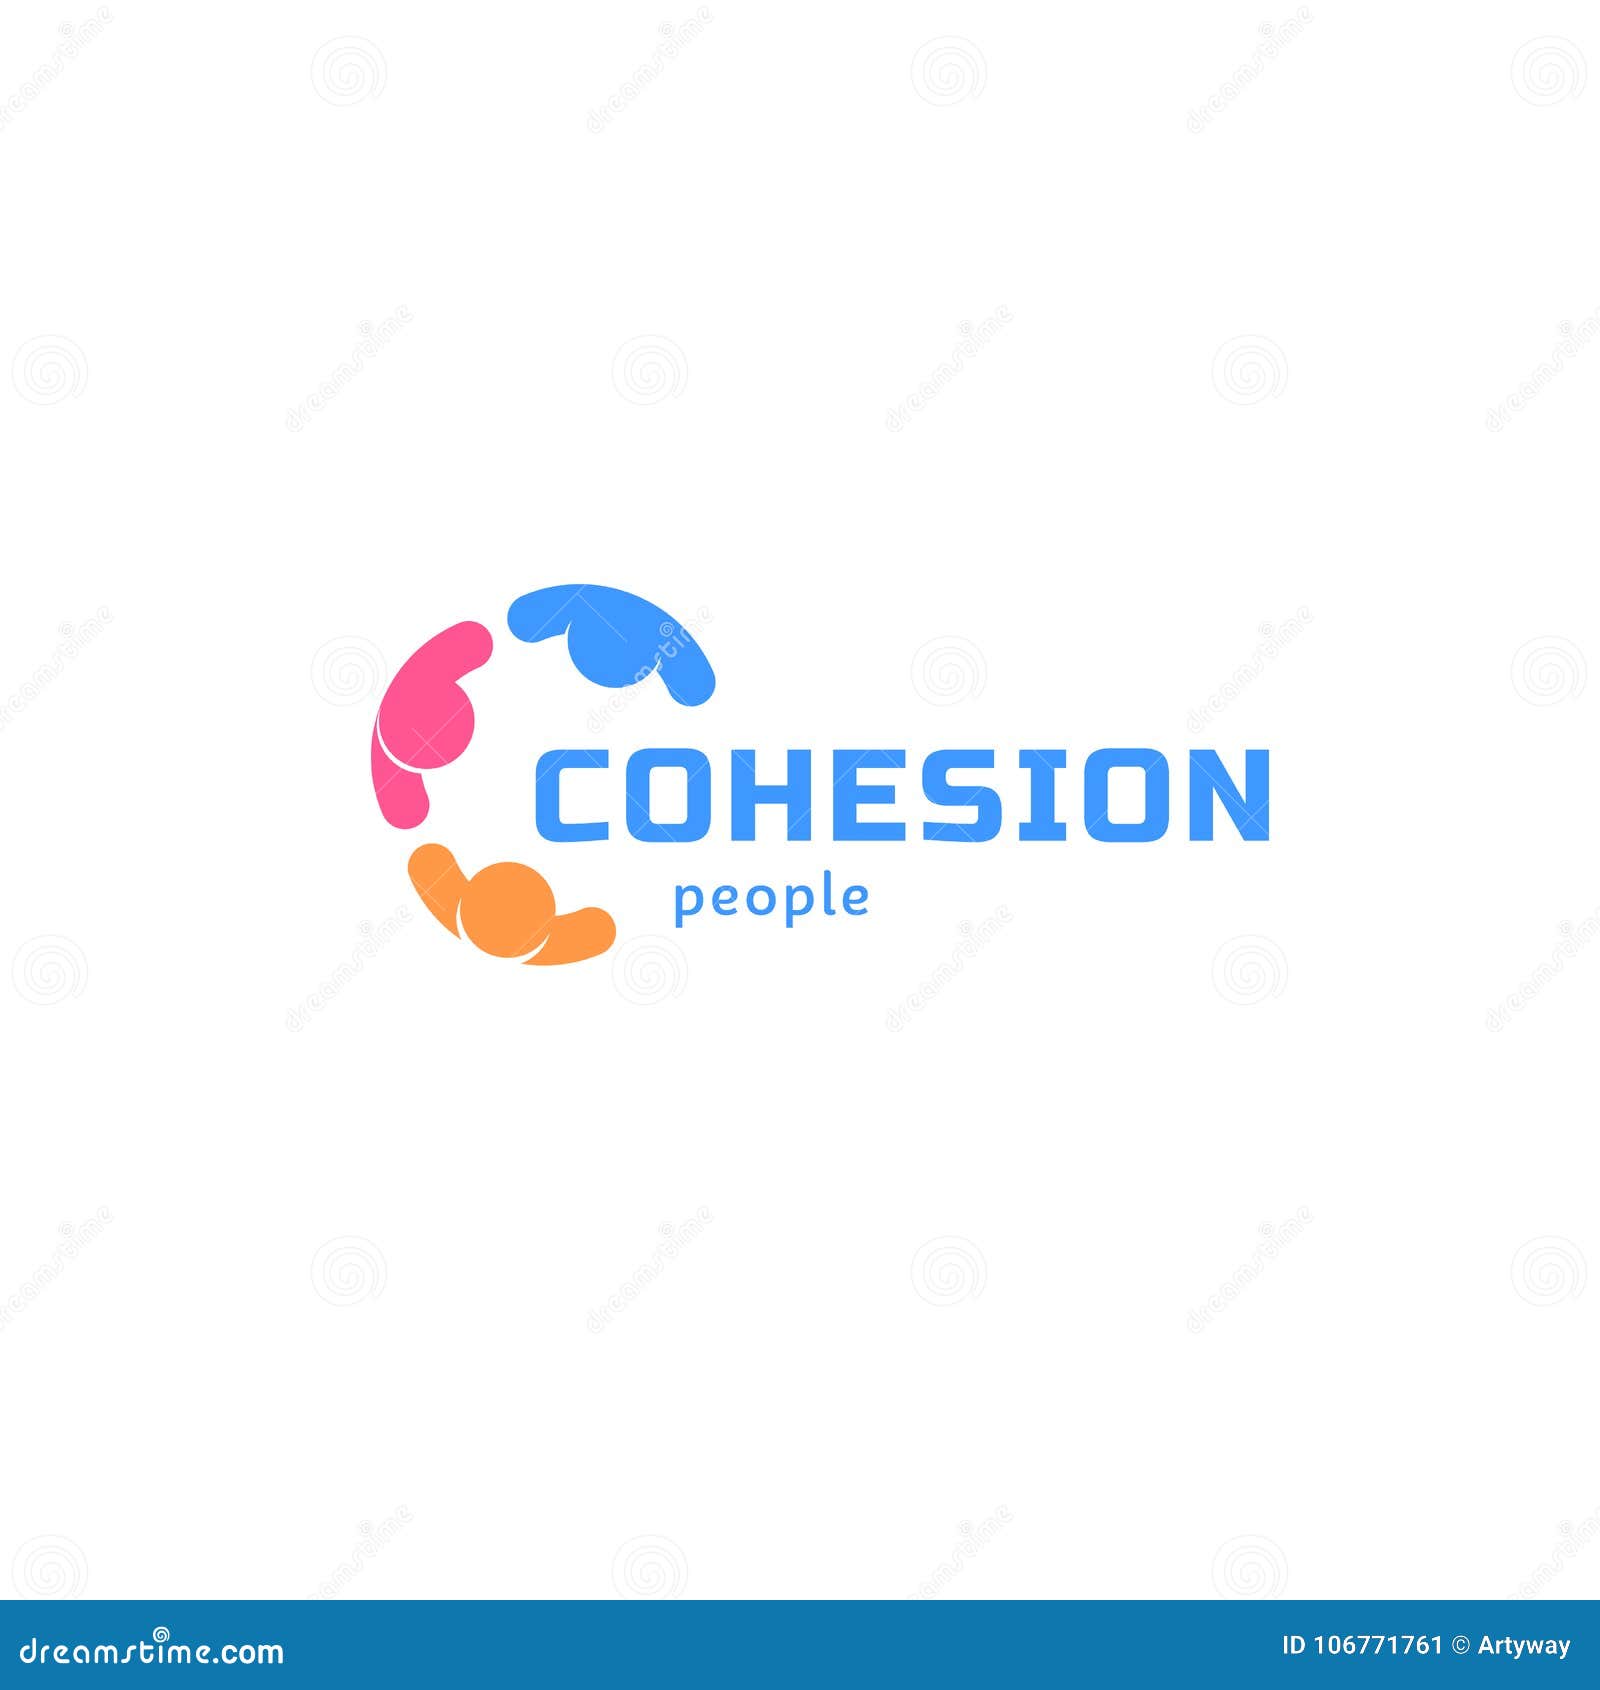 cohesion people, abstract   logo. colorful business identity.